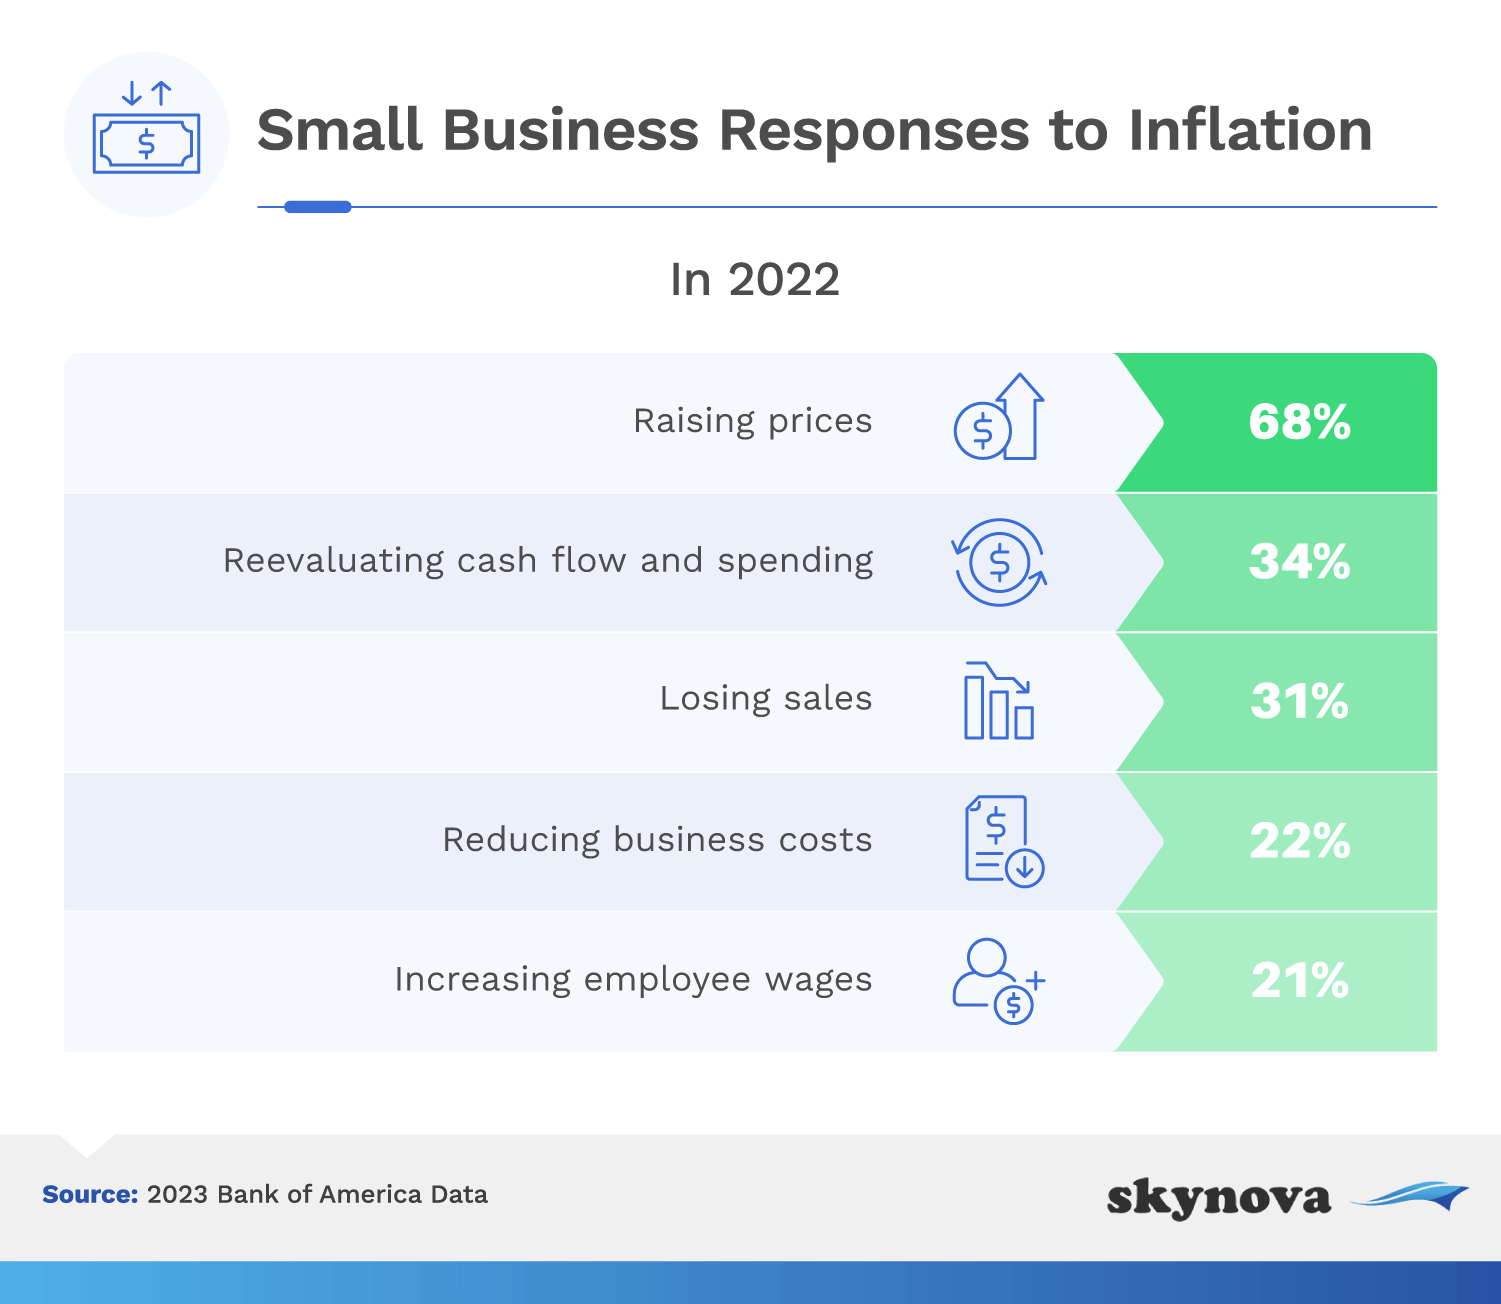 Small business responses to inflation